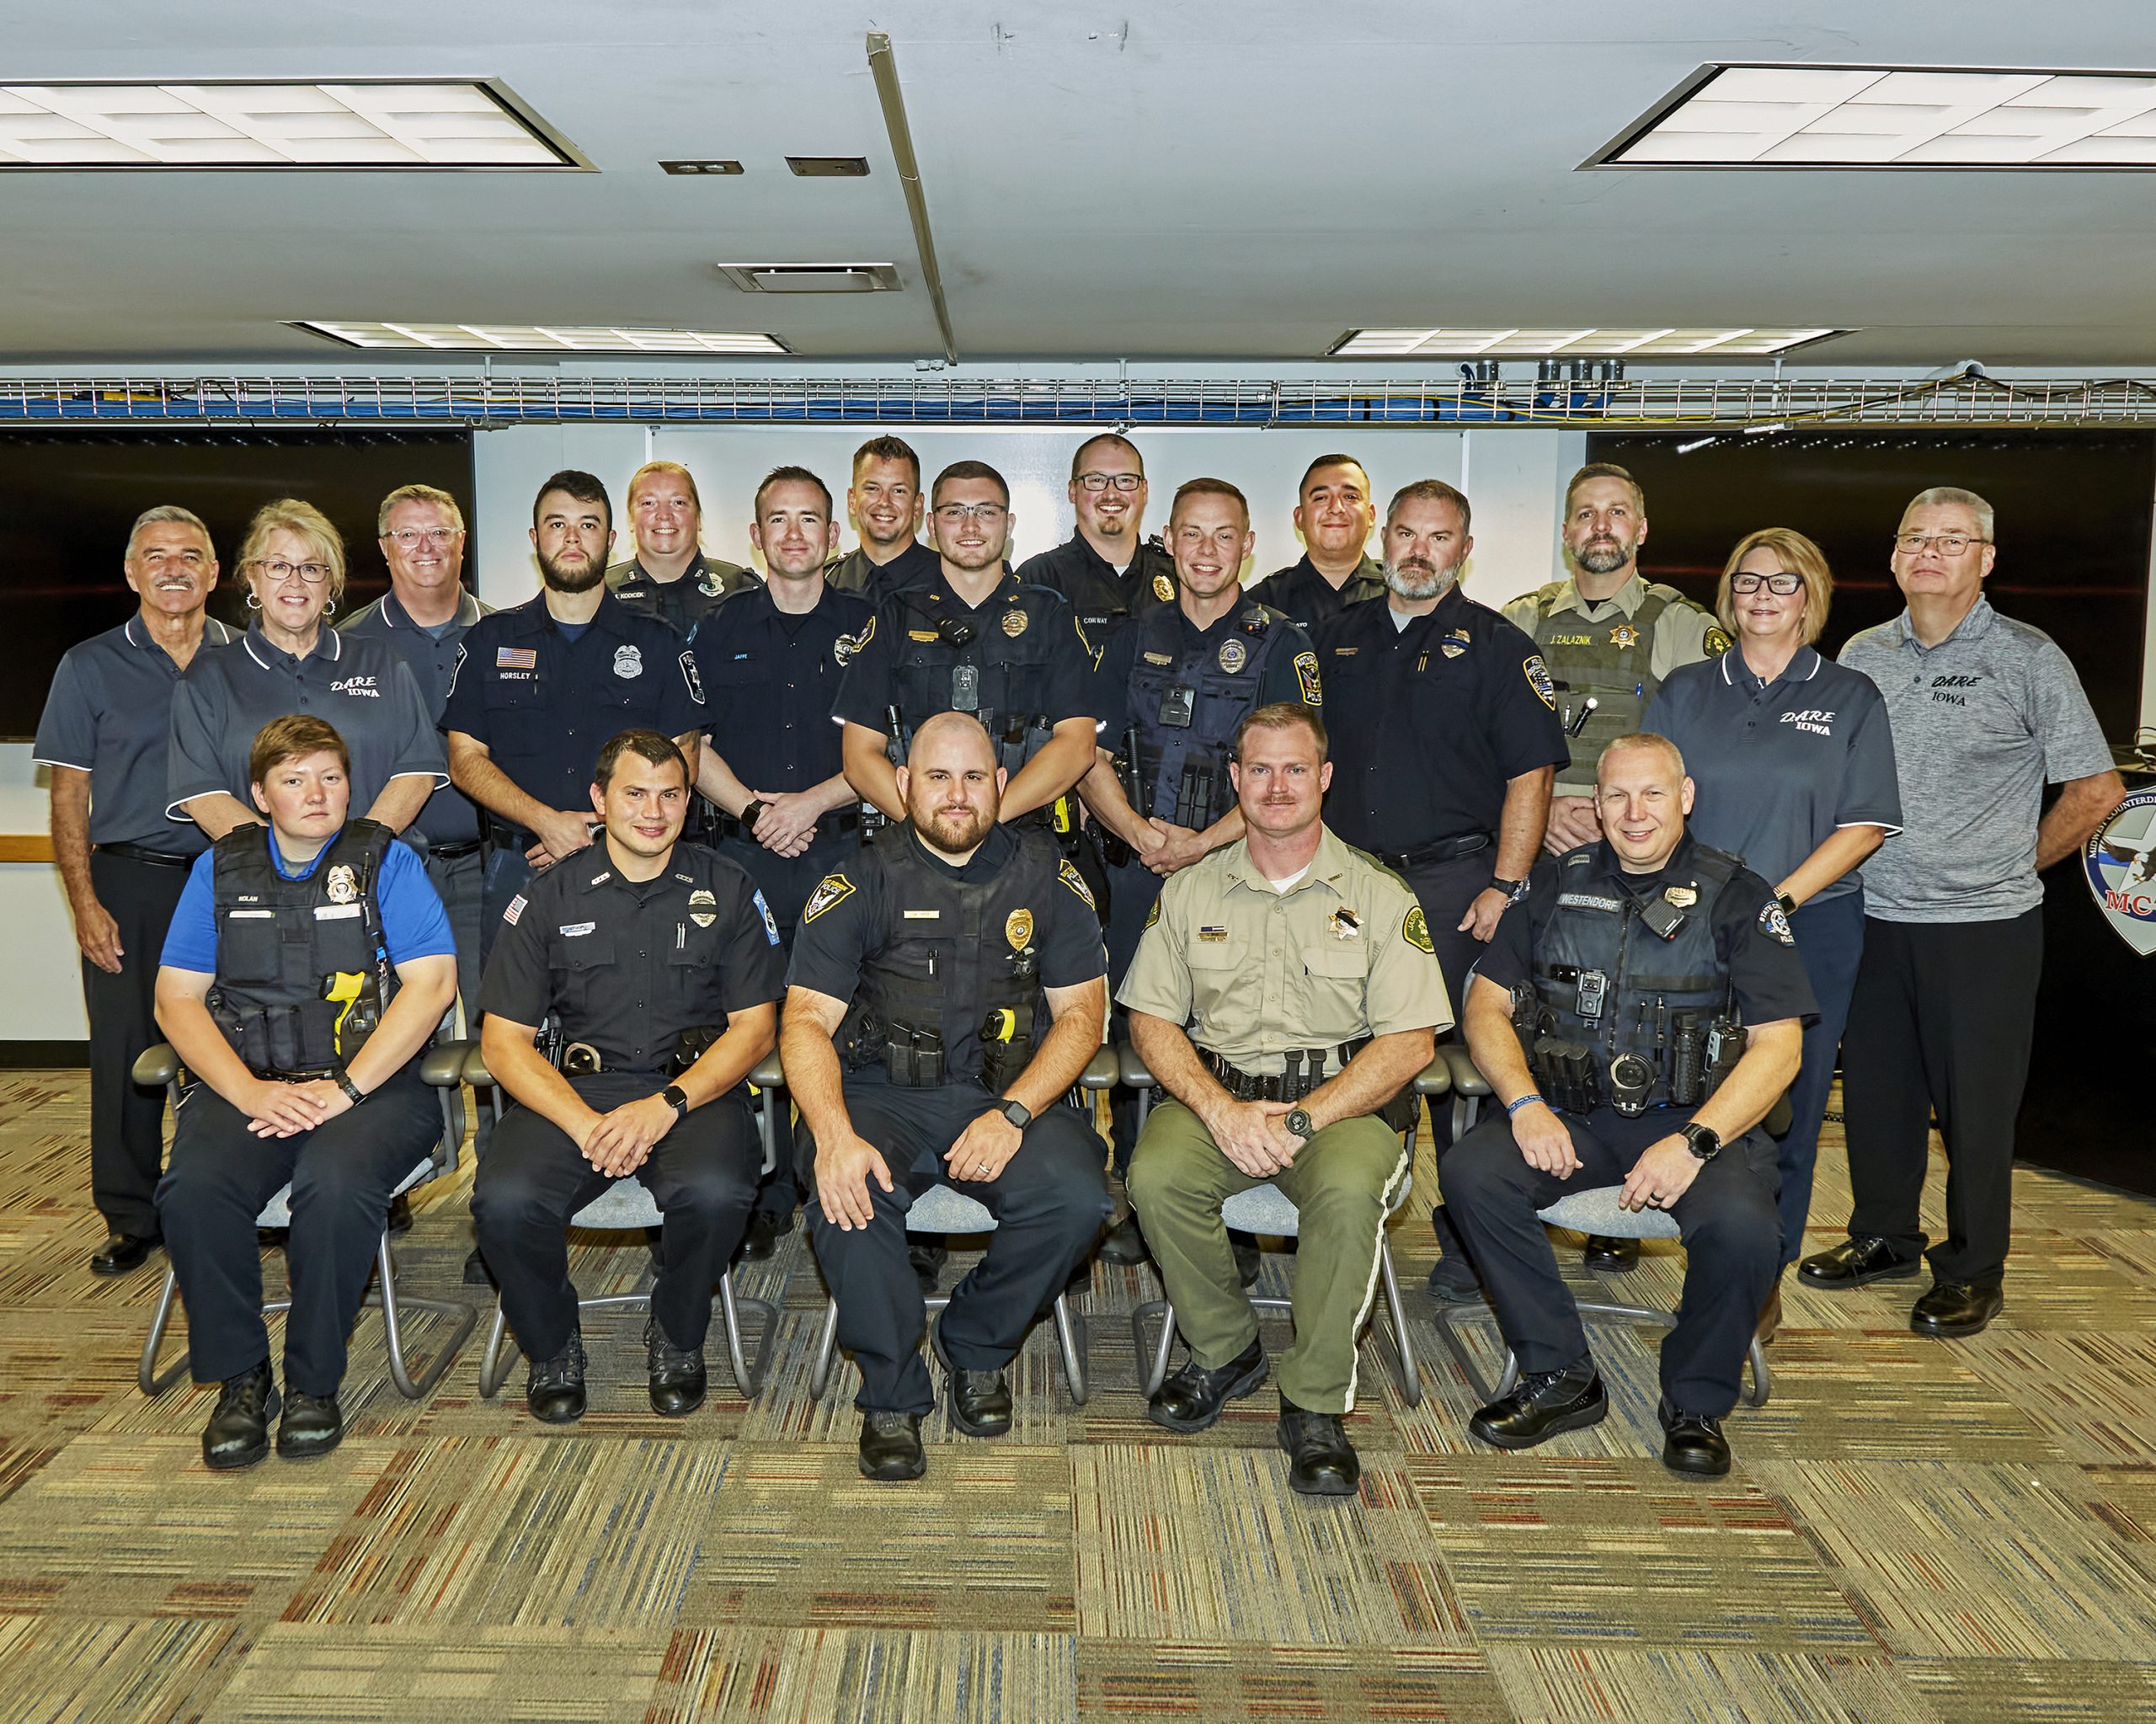 Iowa D.A.R.E. hosted its 44th D.A.R.E. Officer Training at Camp Dodge in Johnston, IA. The training consisted of 15 officers from Iowa, Illinois, Wisconsin, Missouri, and Indiana. The training was held September 18 - 28, 2023